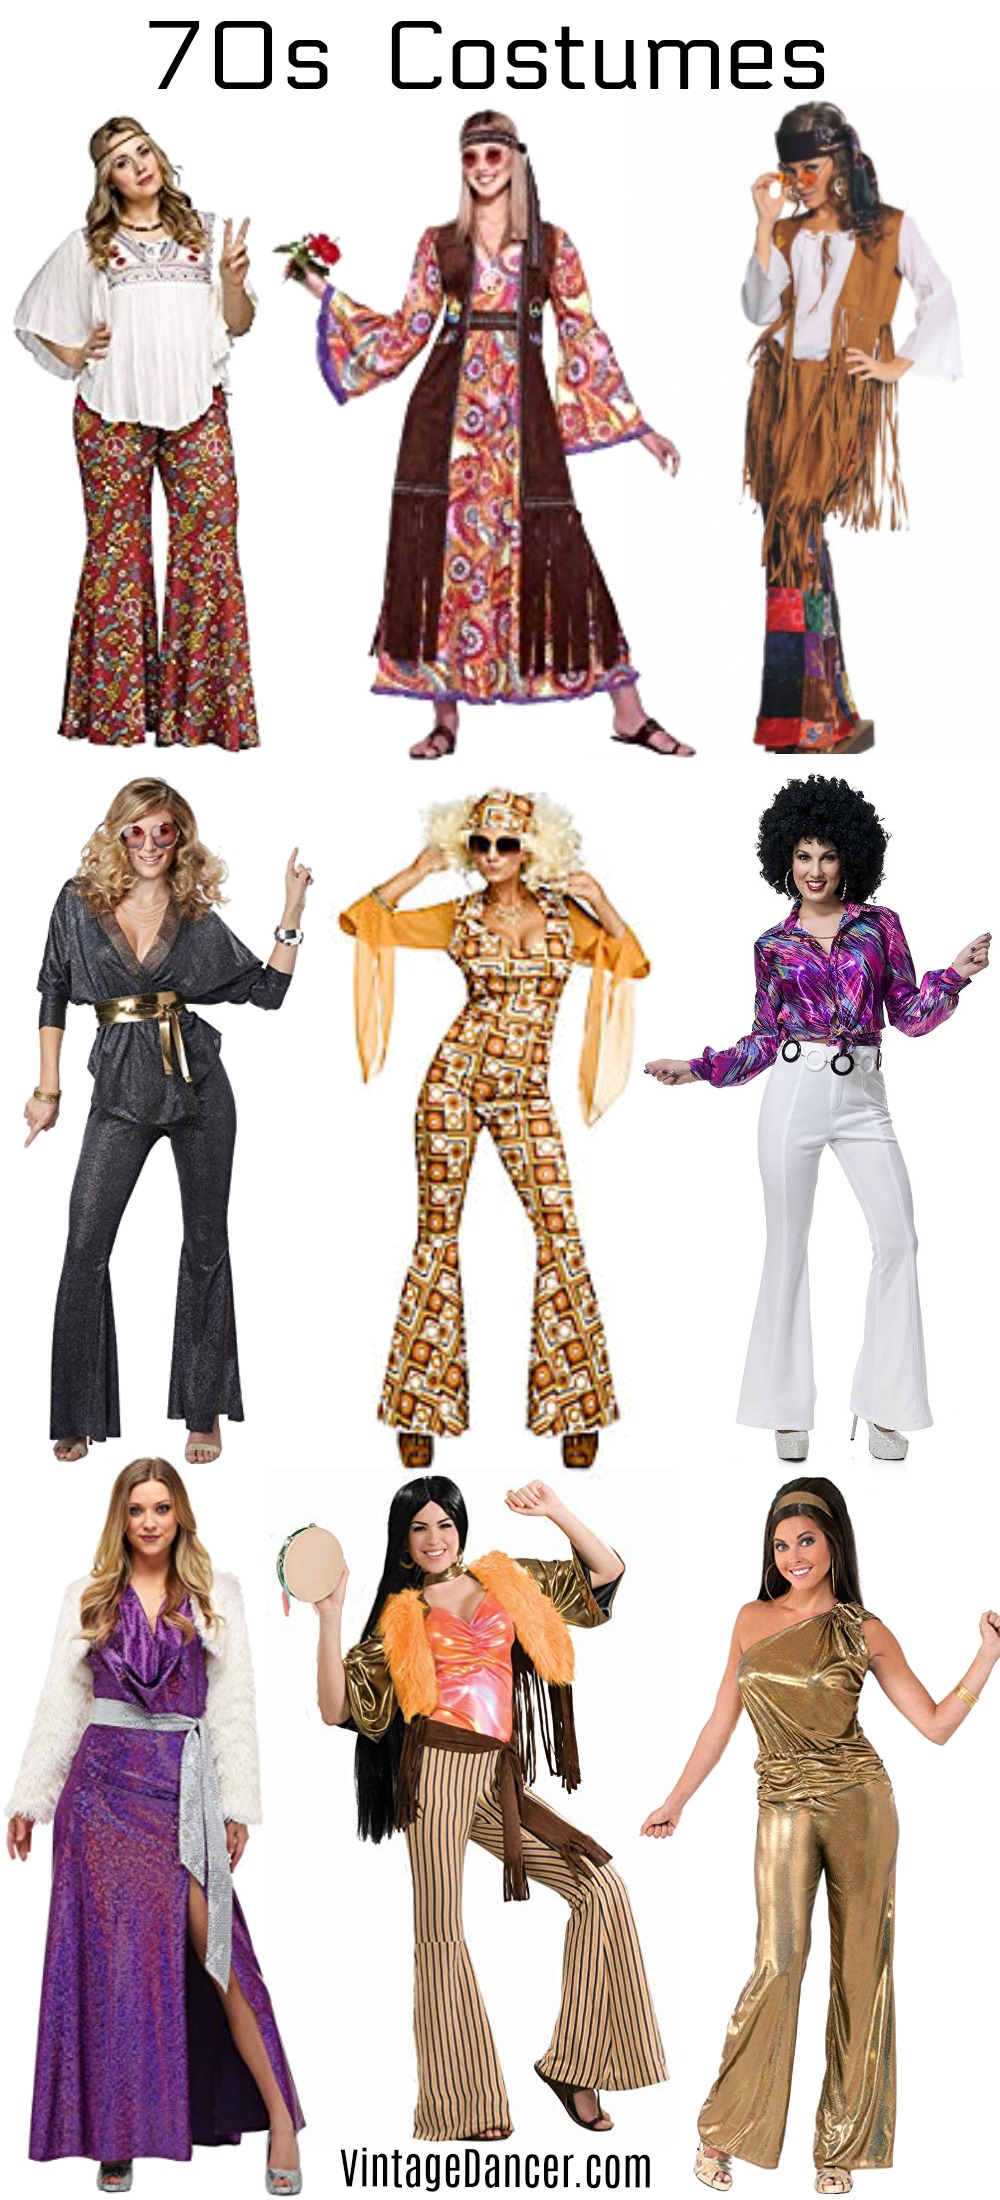 70s Costumes Disco Costumes Hippie Outfits Vintage Dancer